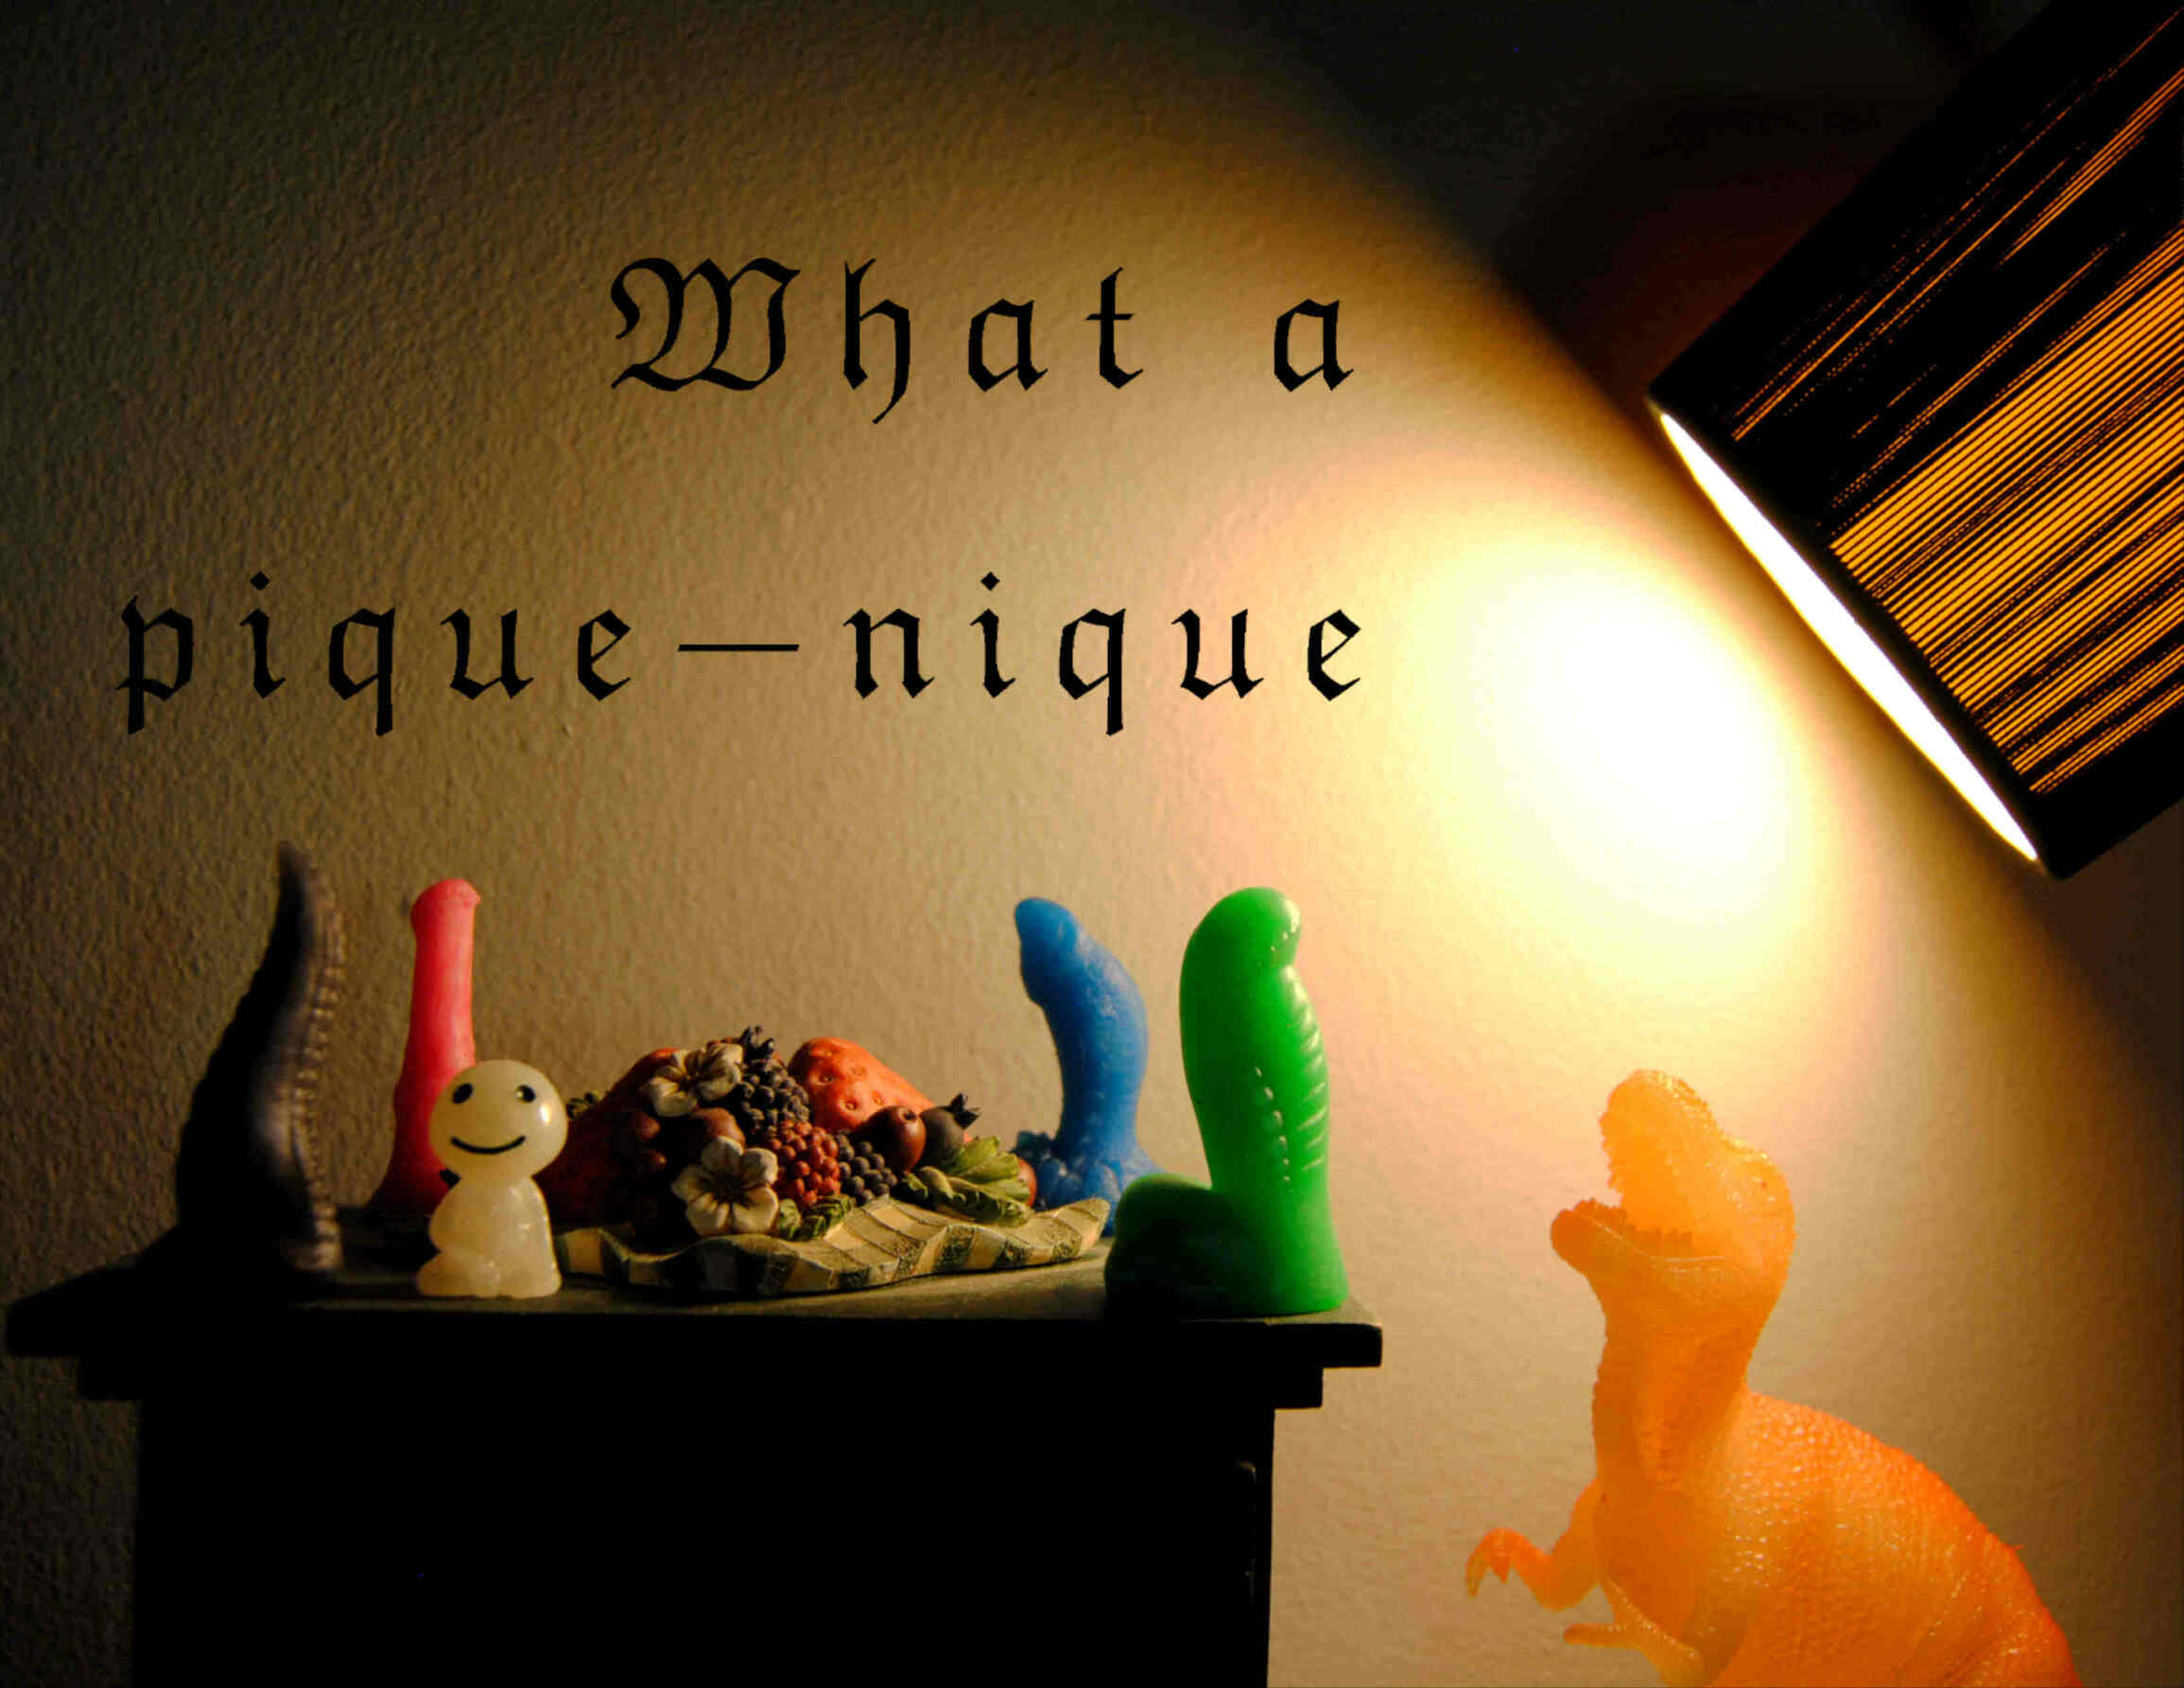 picture of mini dildos and a plastic dinosaur, it is written : What a pique nique